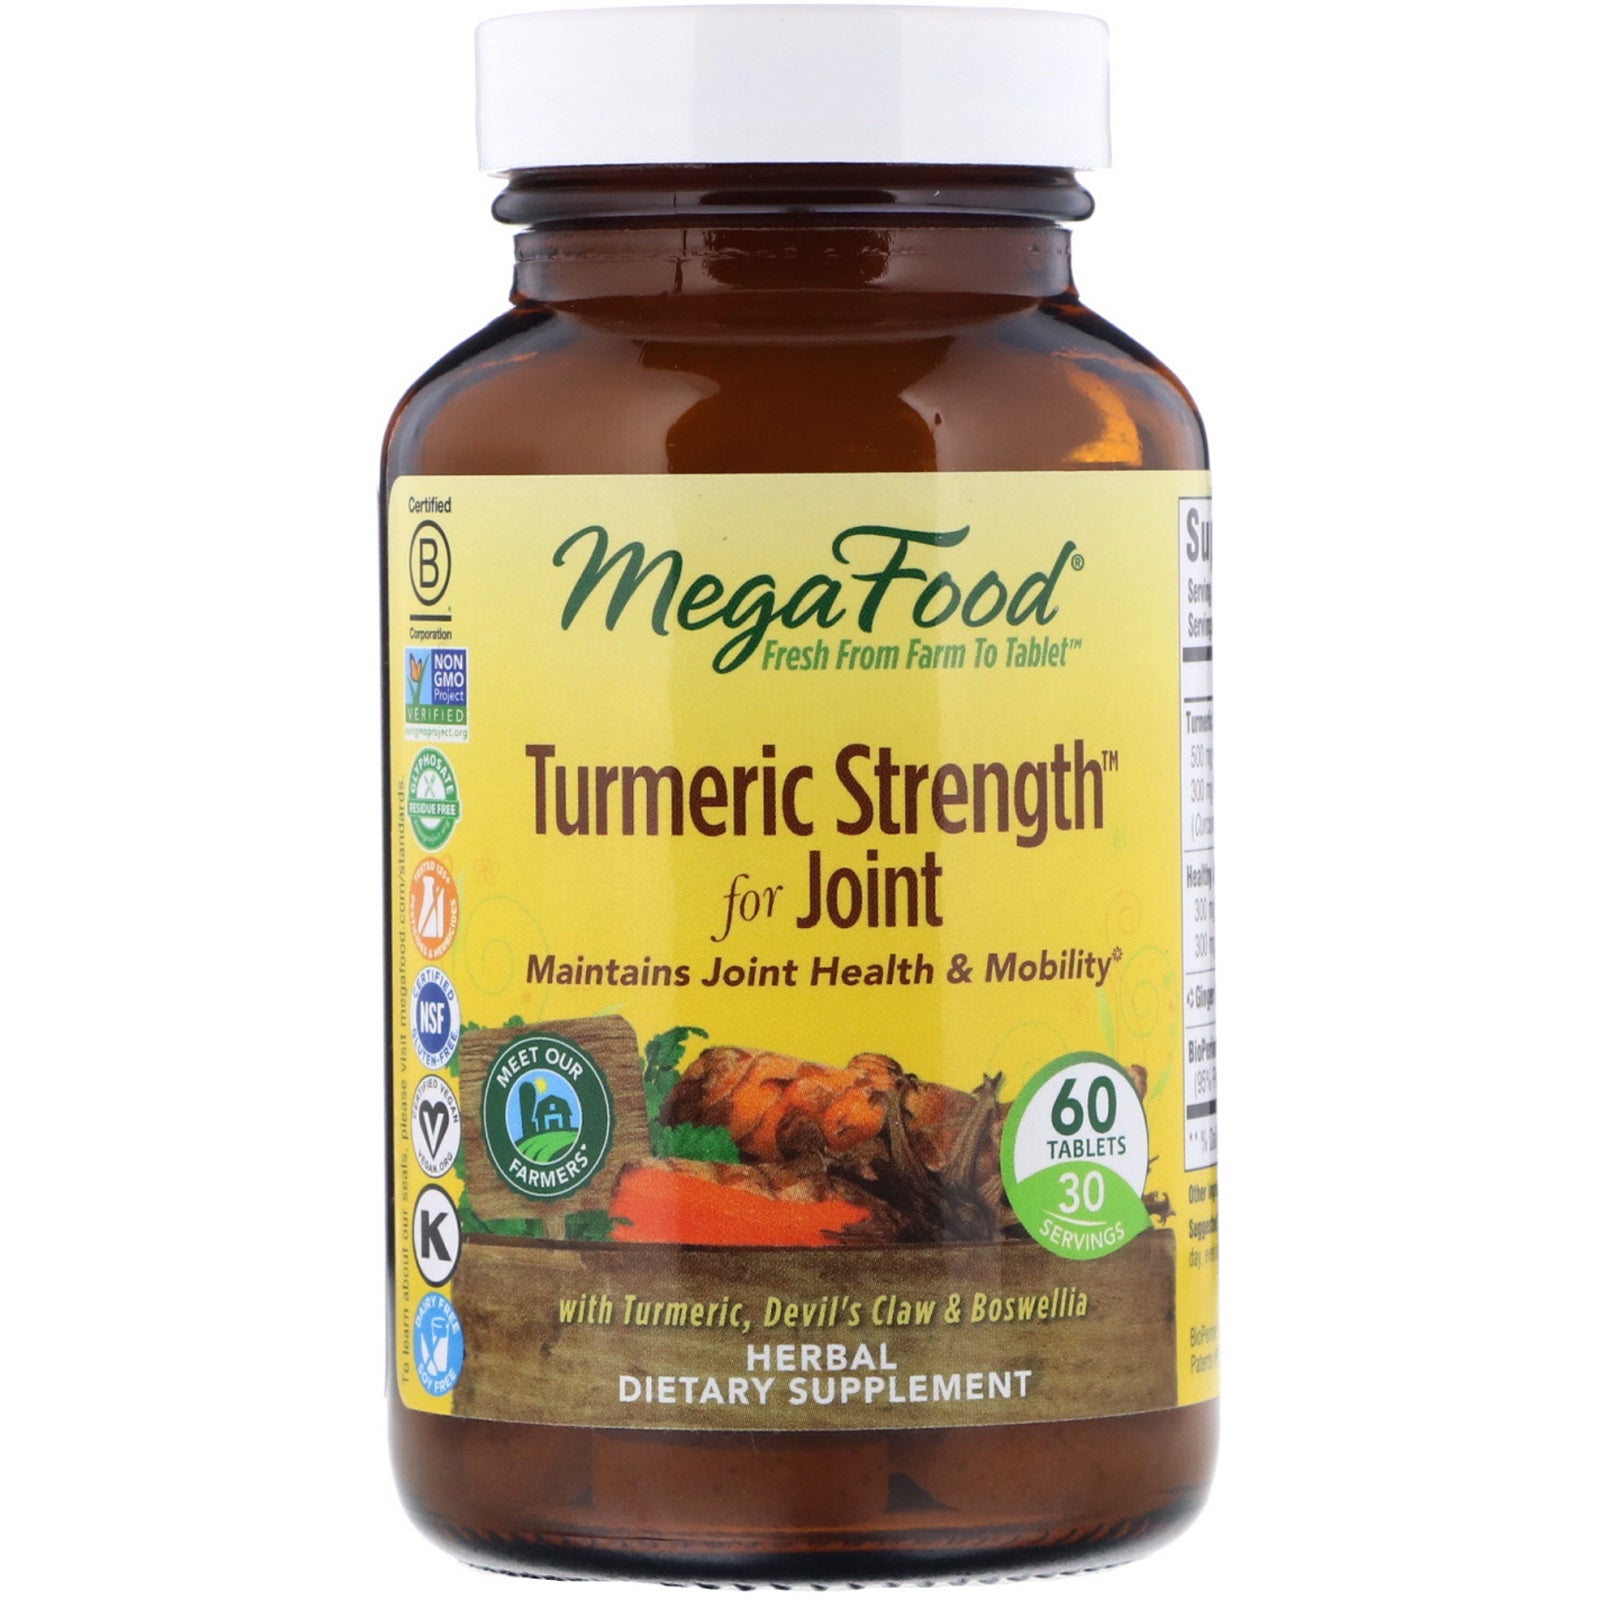 MegaFood, Turmeric Strength for Joint, 60 Tablets